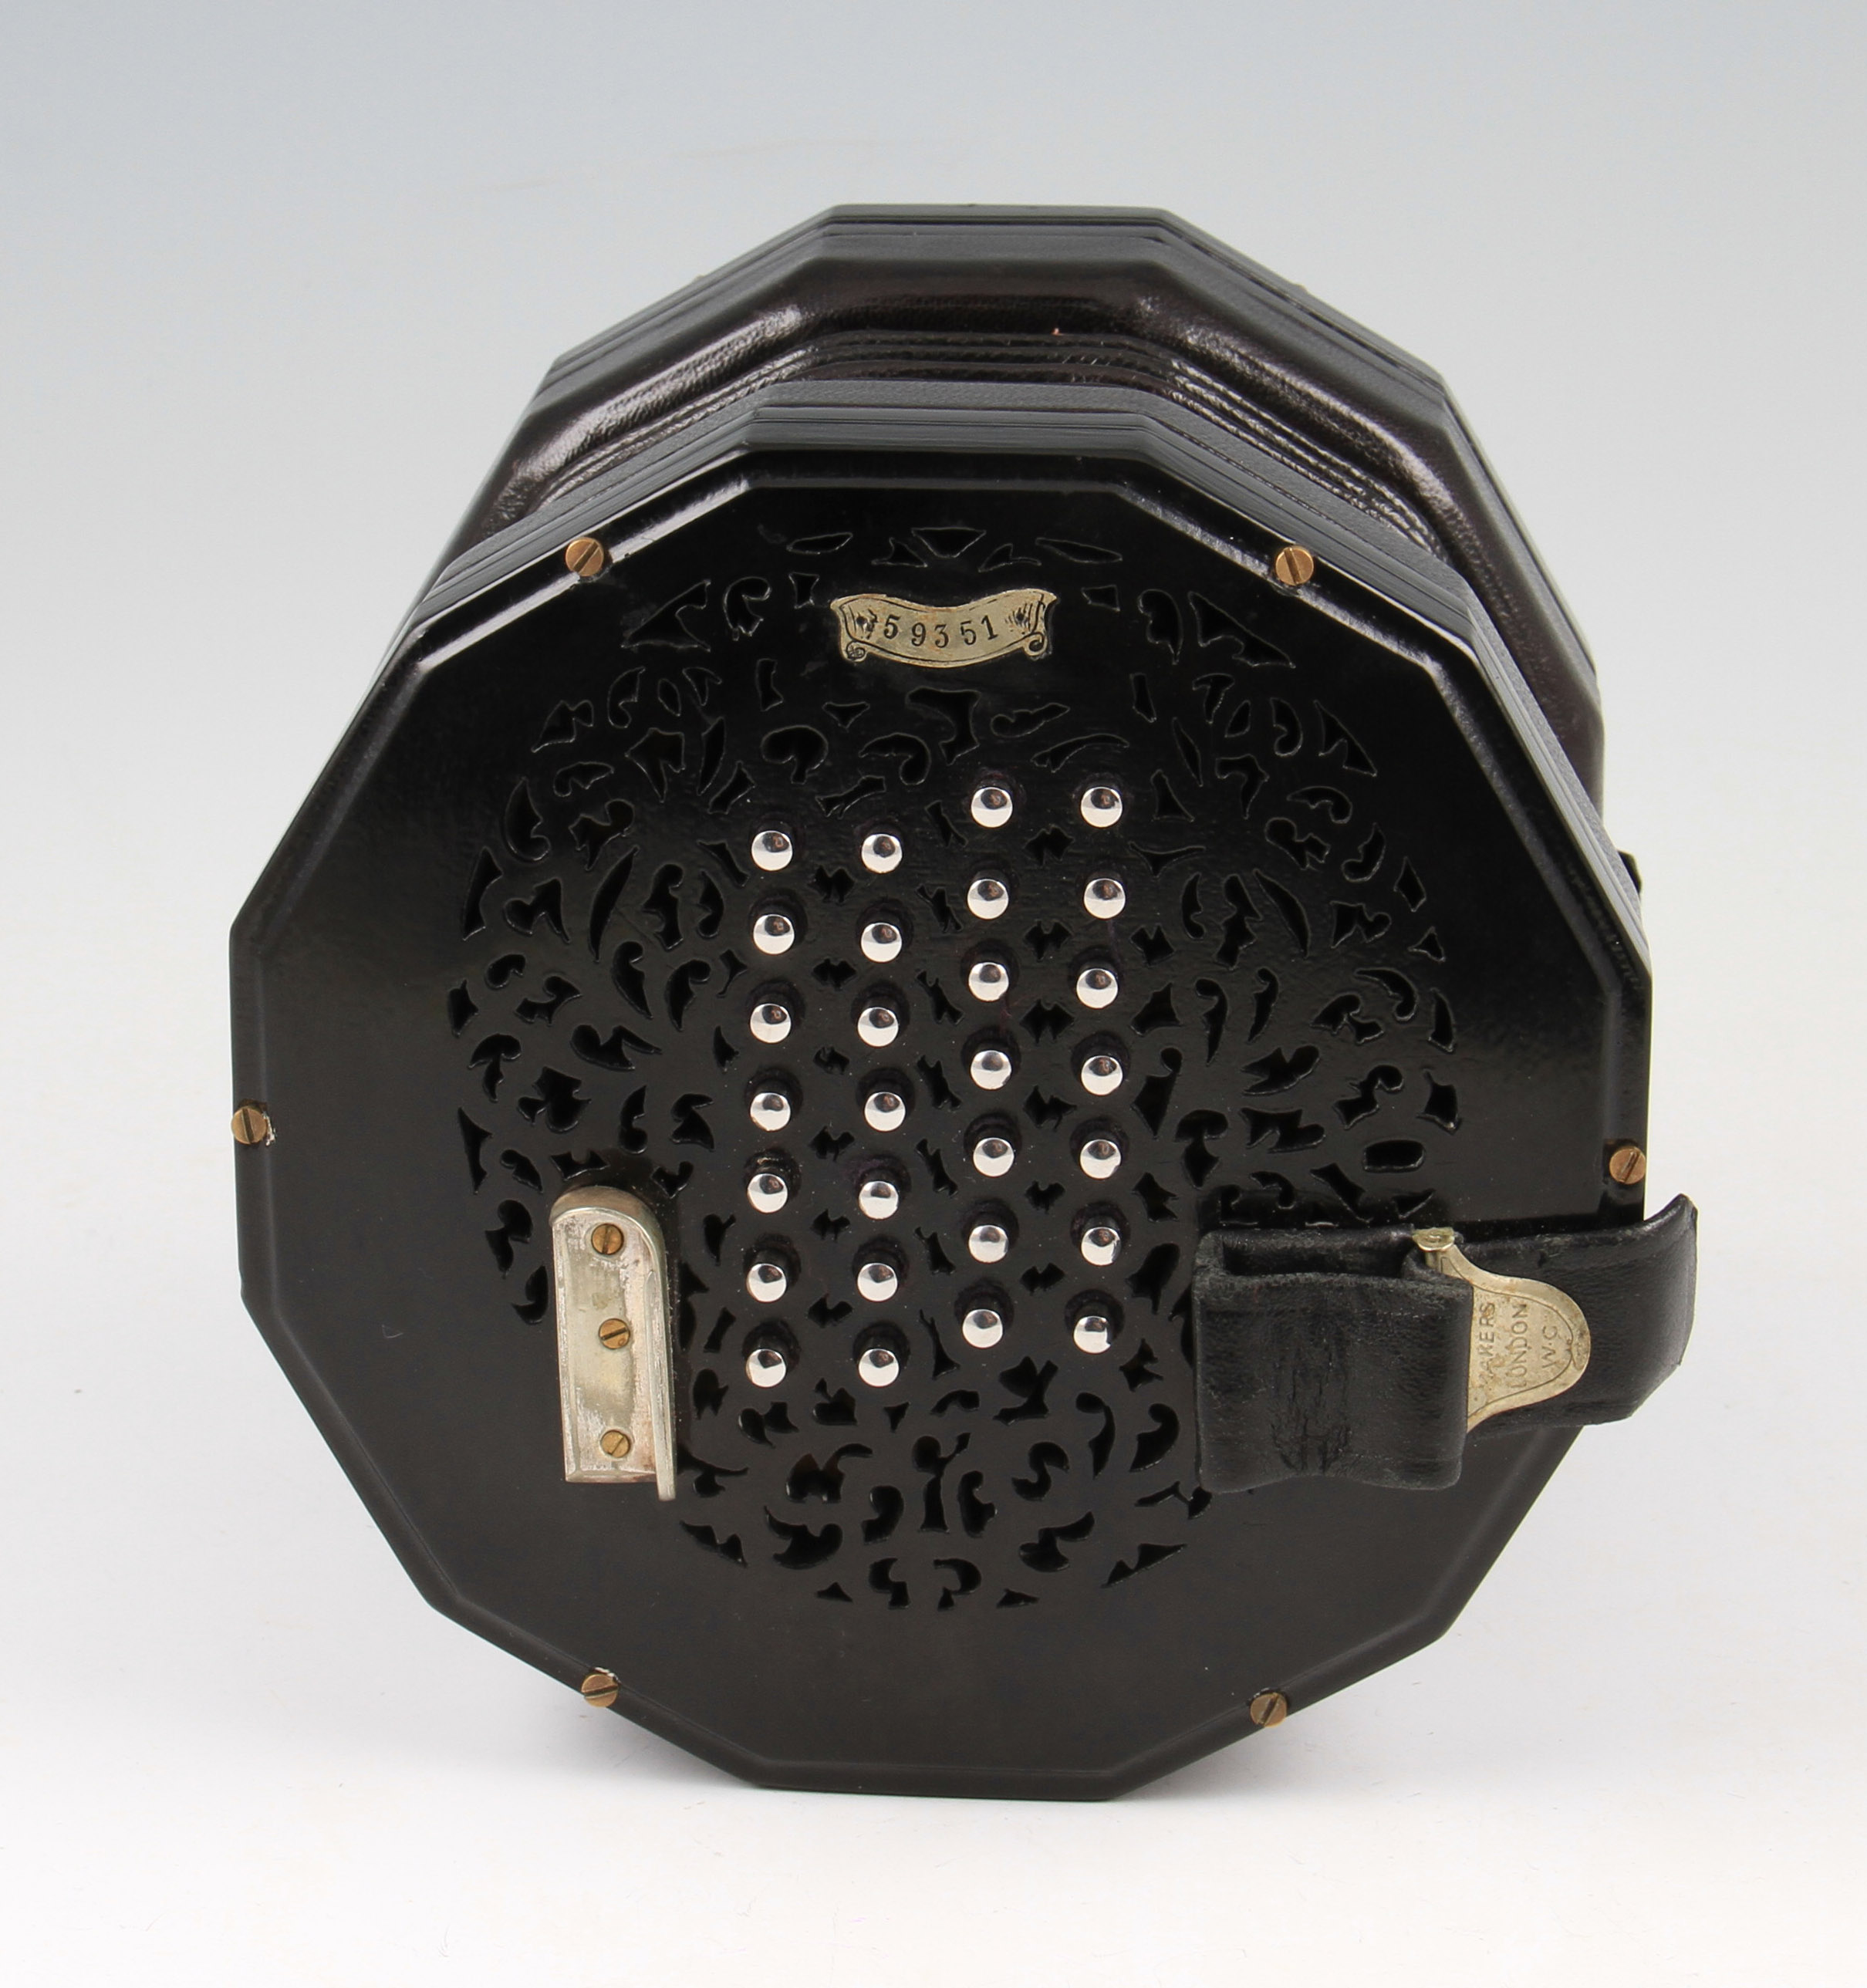 A Lachenal & Co 'The Edeophone' concertina, with black ebonized body with fretwork end sections with - Image 3 of 3